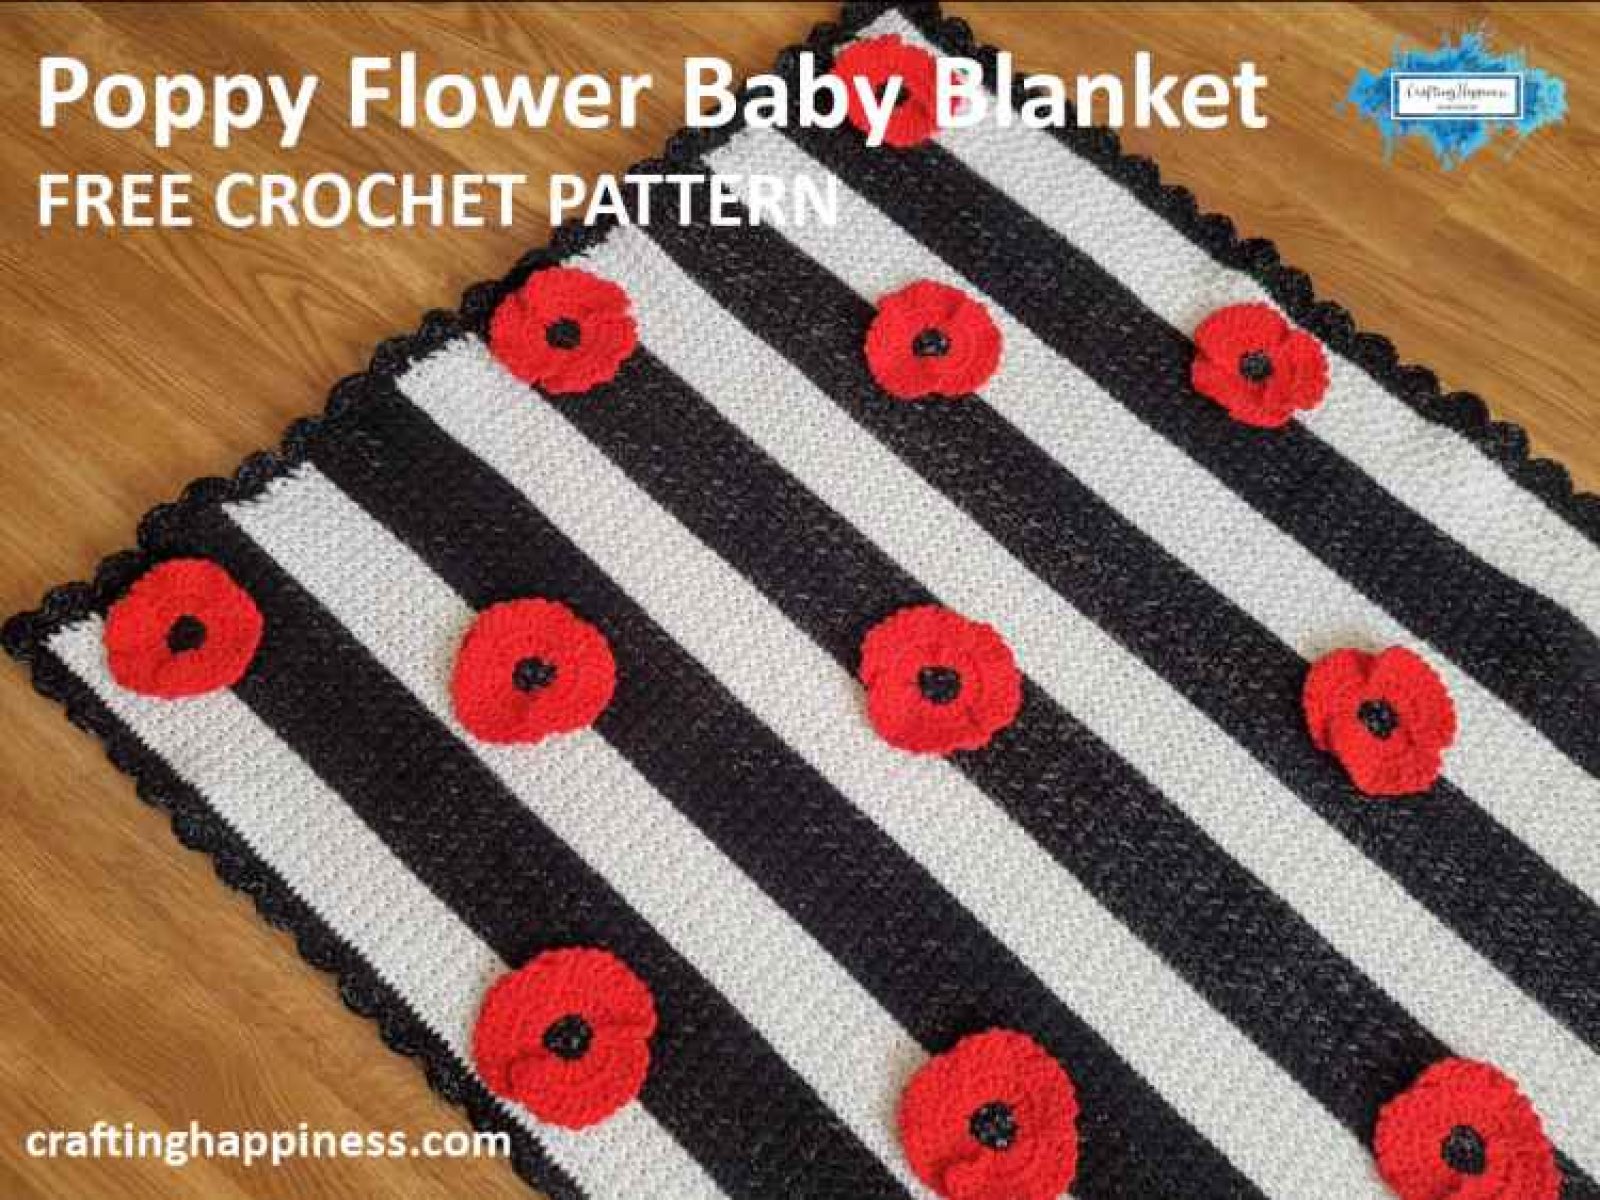 Crochet Poppy Flower Free Pattern by Crafting Happiness Facebook Poster